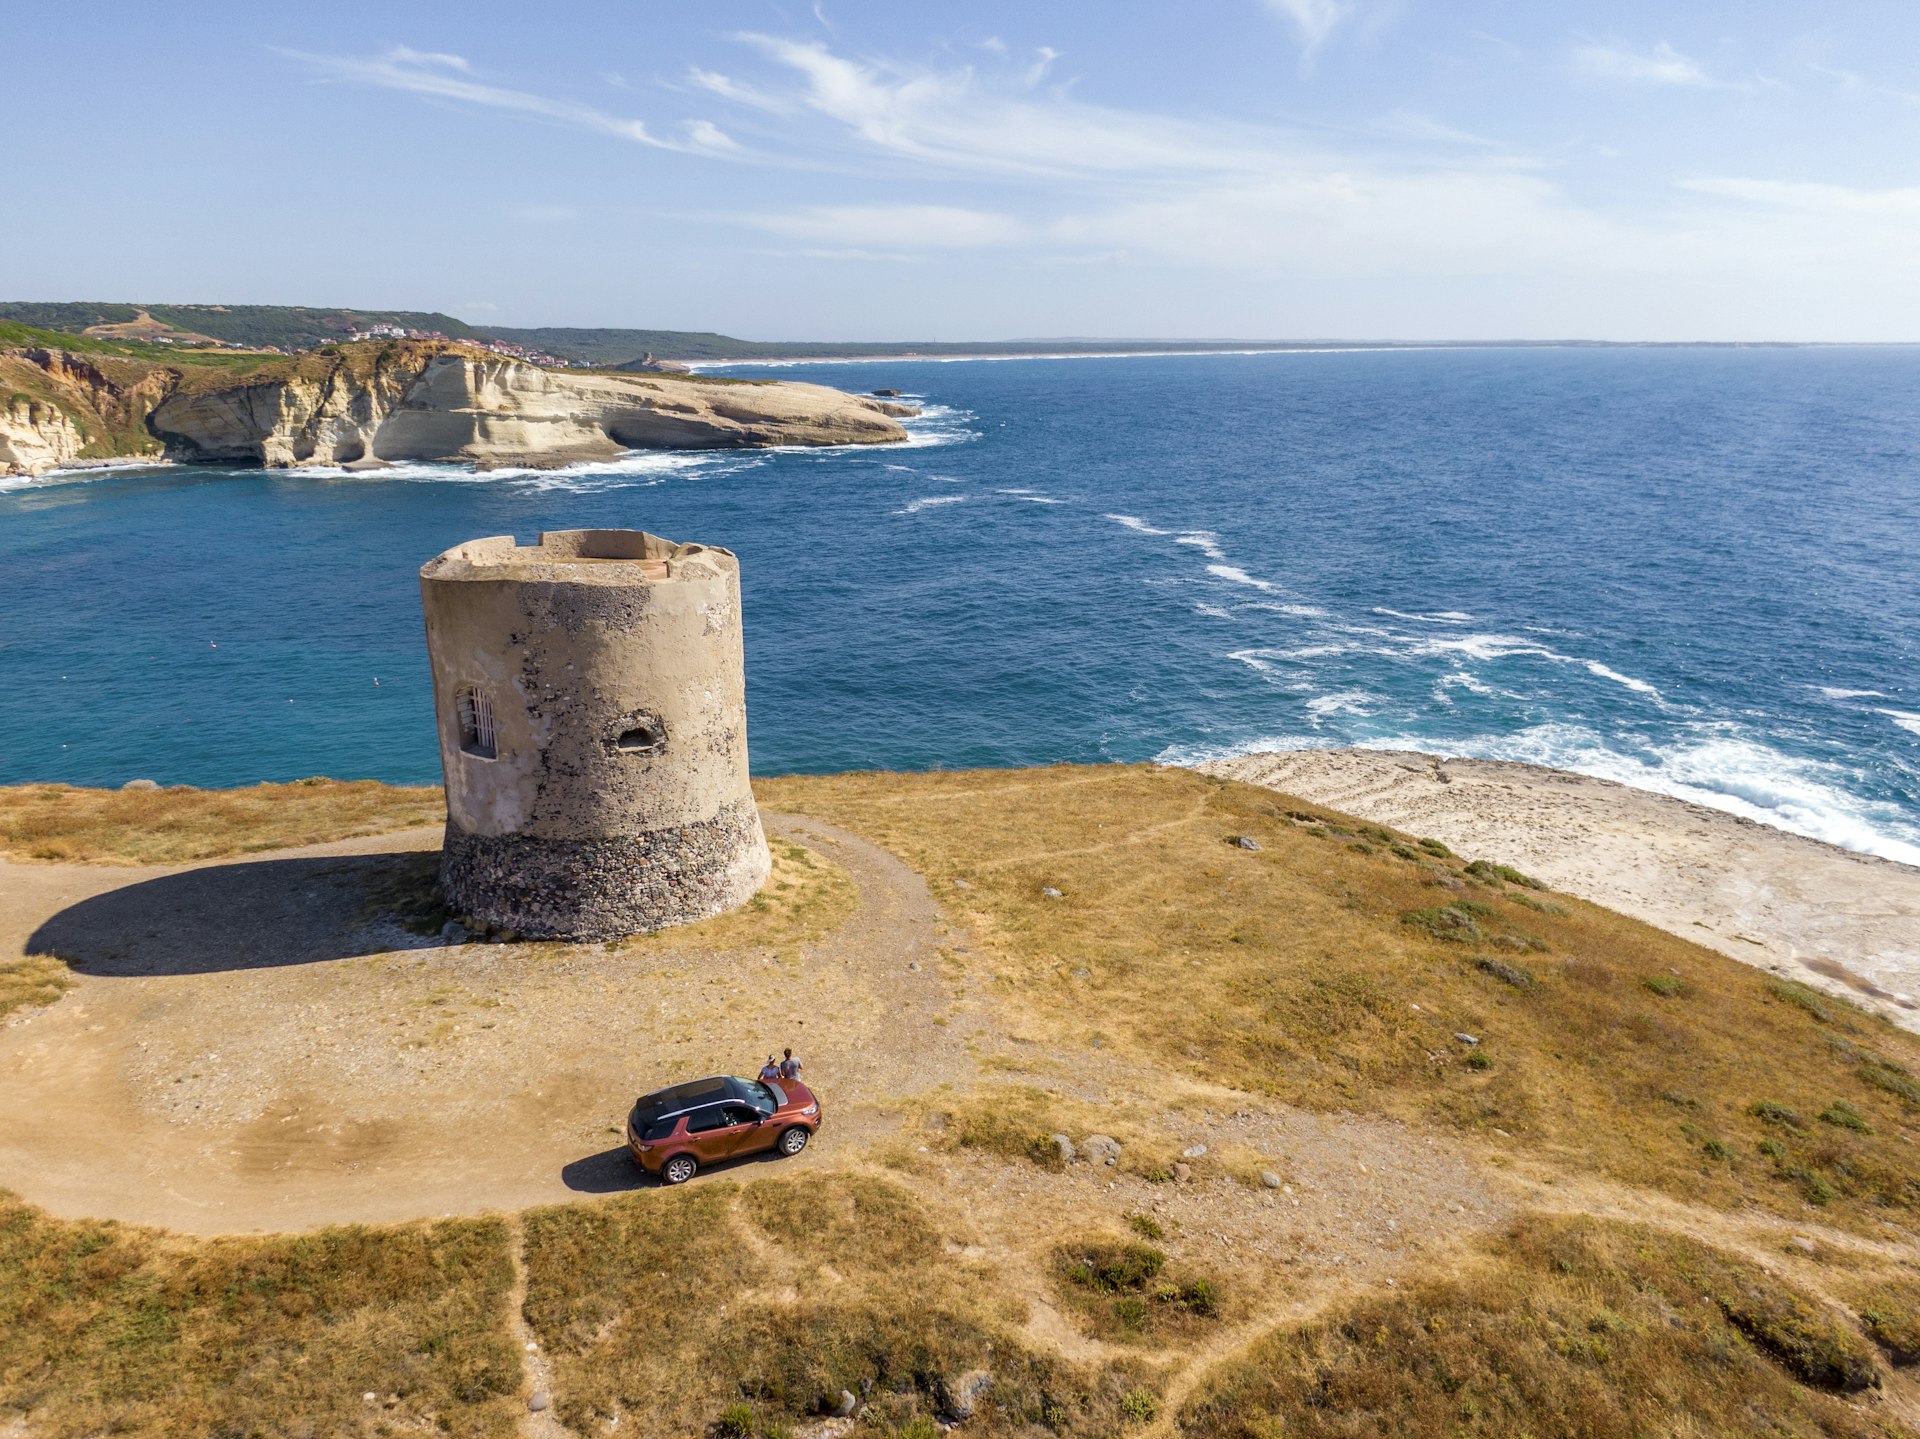 A red car sits in front of a beautiful bay with a ruined tower in summertime, Sardinia, Italy.